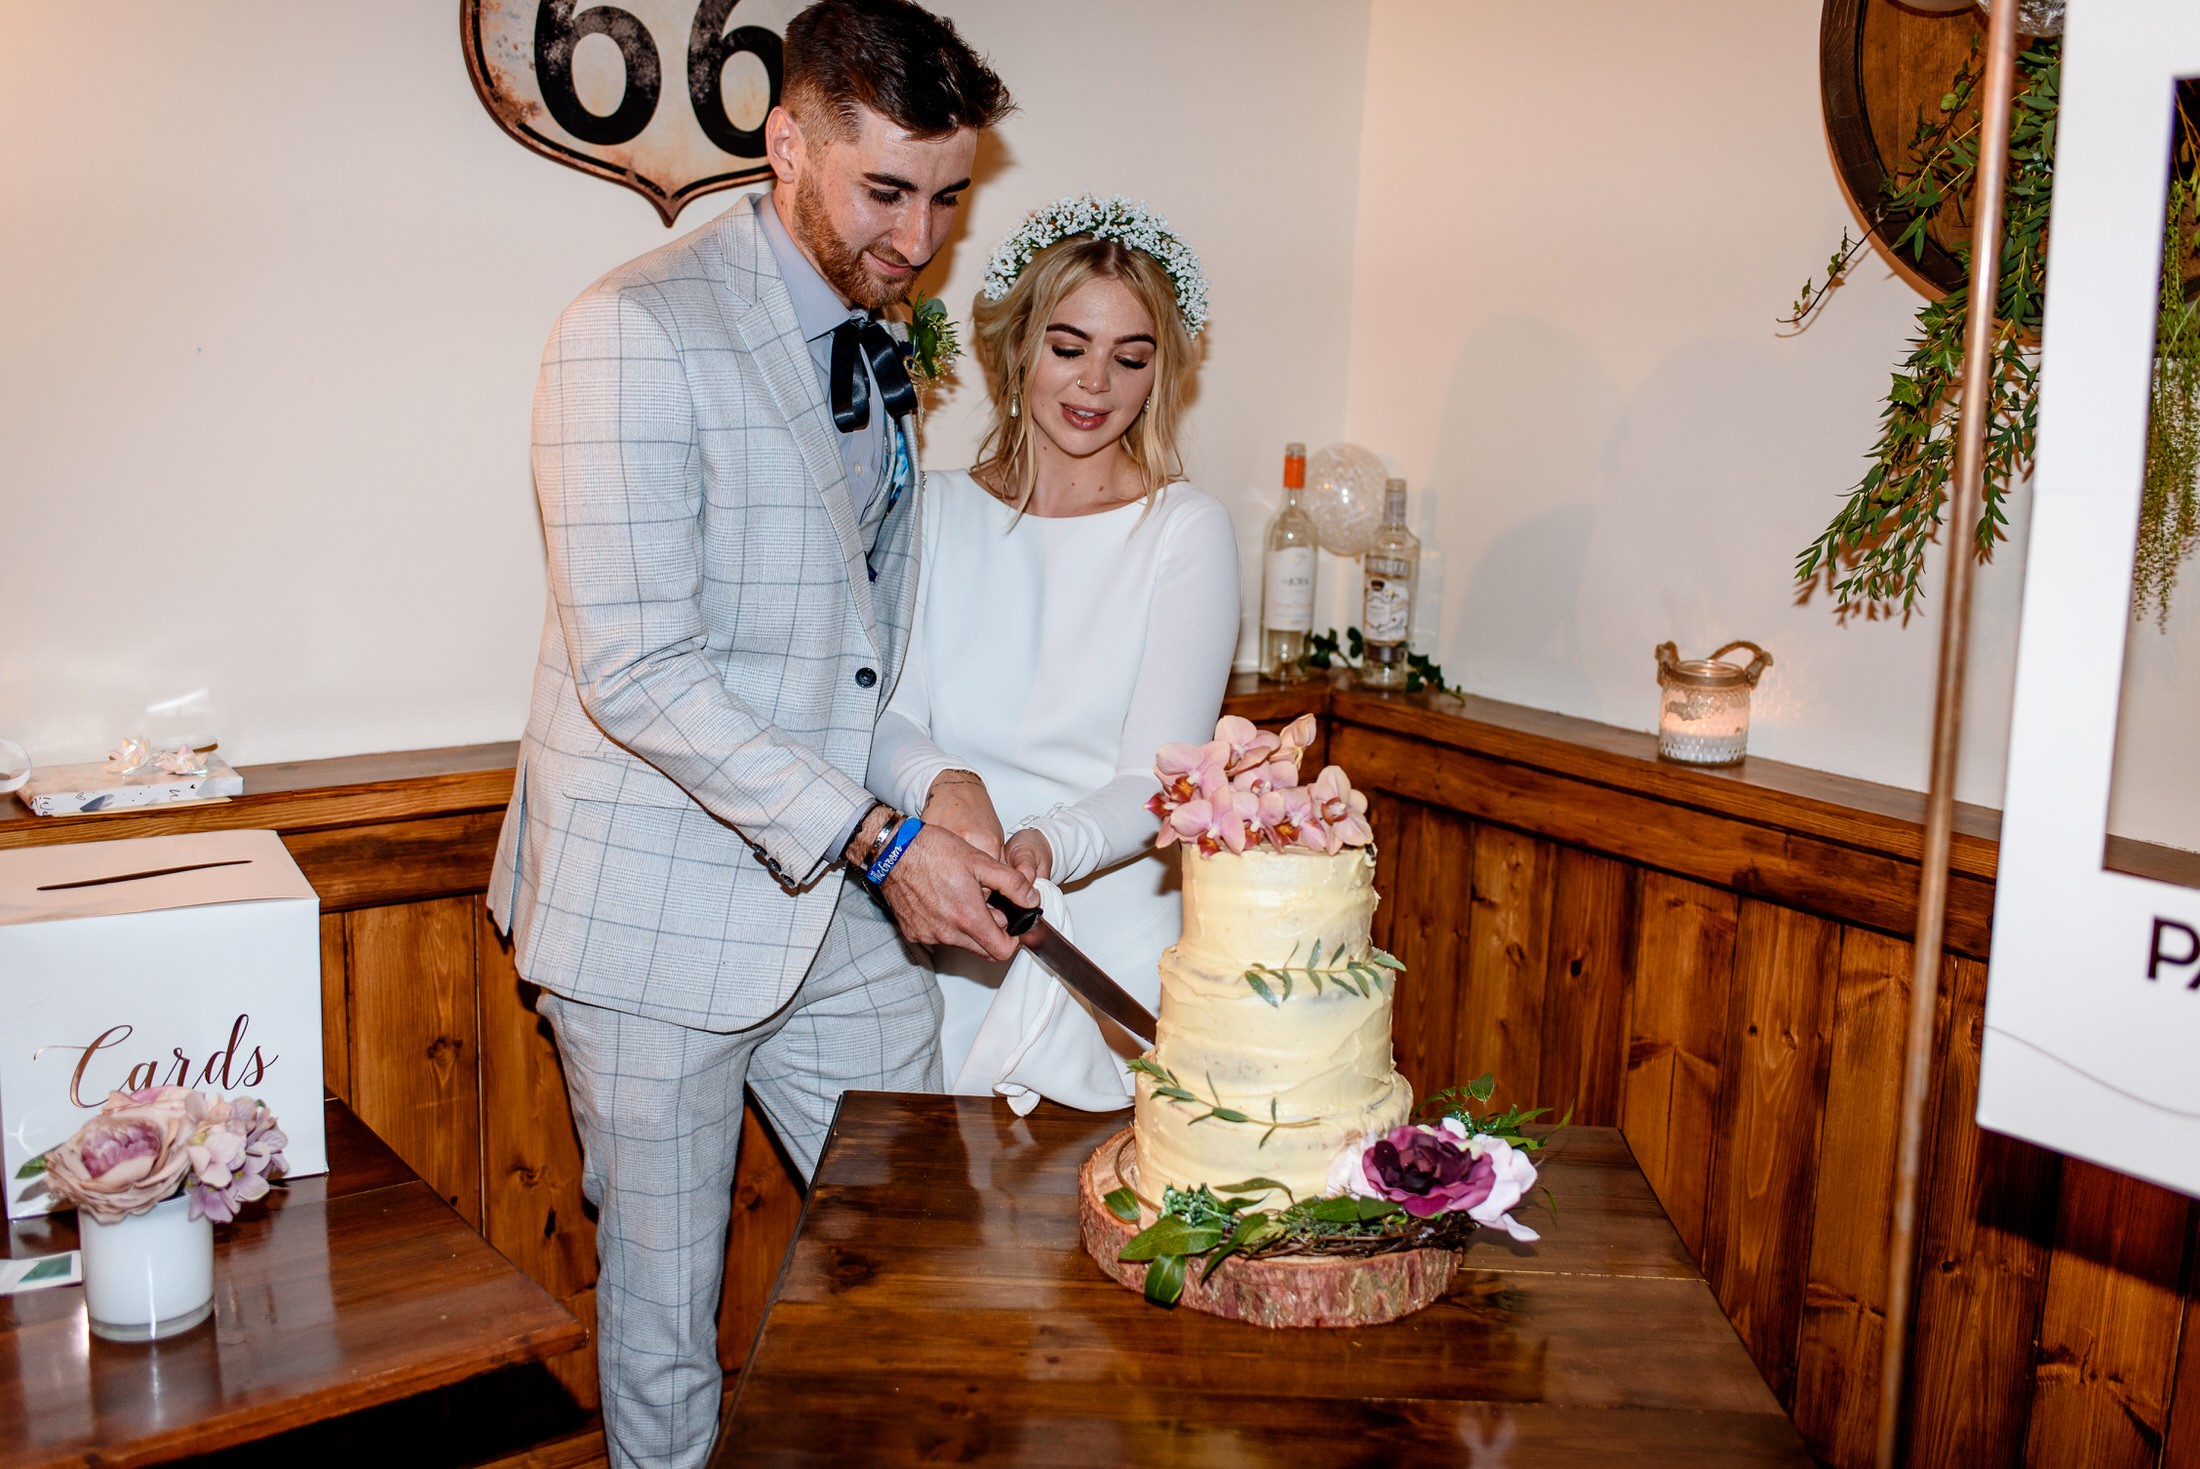 A wedding couple cutting a cake at Scrivelsby Walled Garden.